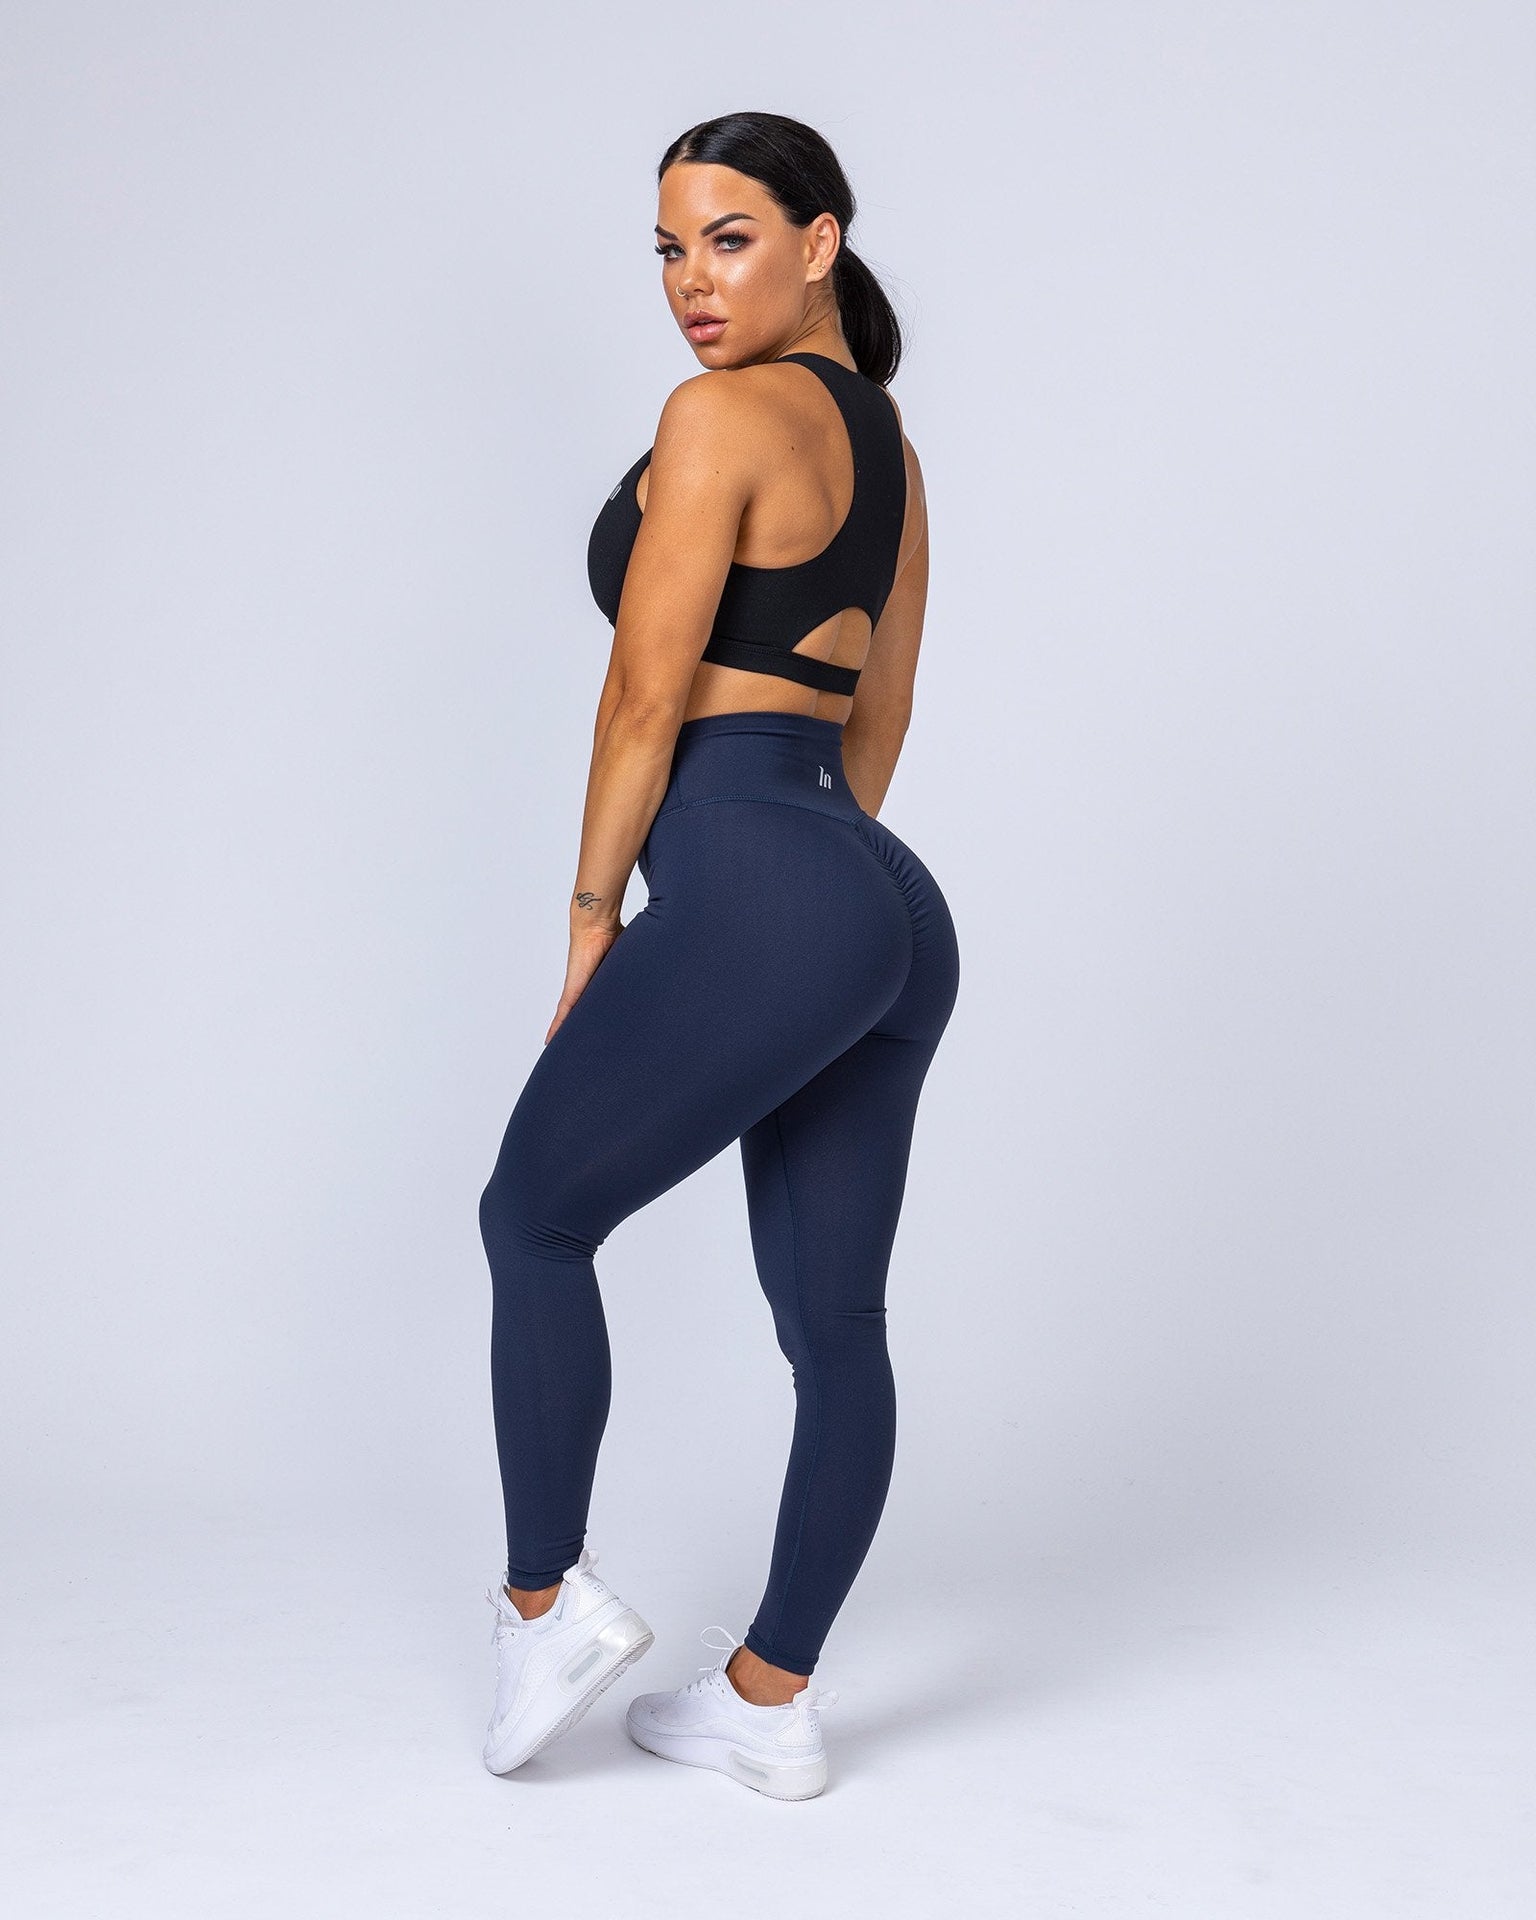 Why is something Navy so expensive? How are these leggings $125? :  r/NYCinfluencersnark